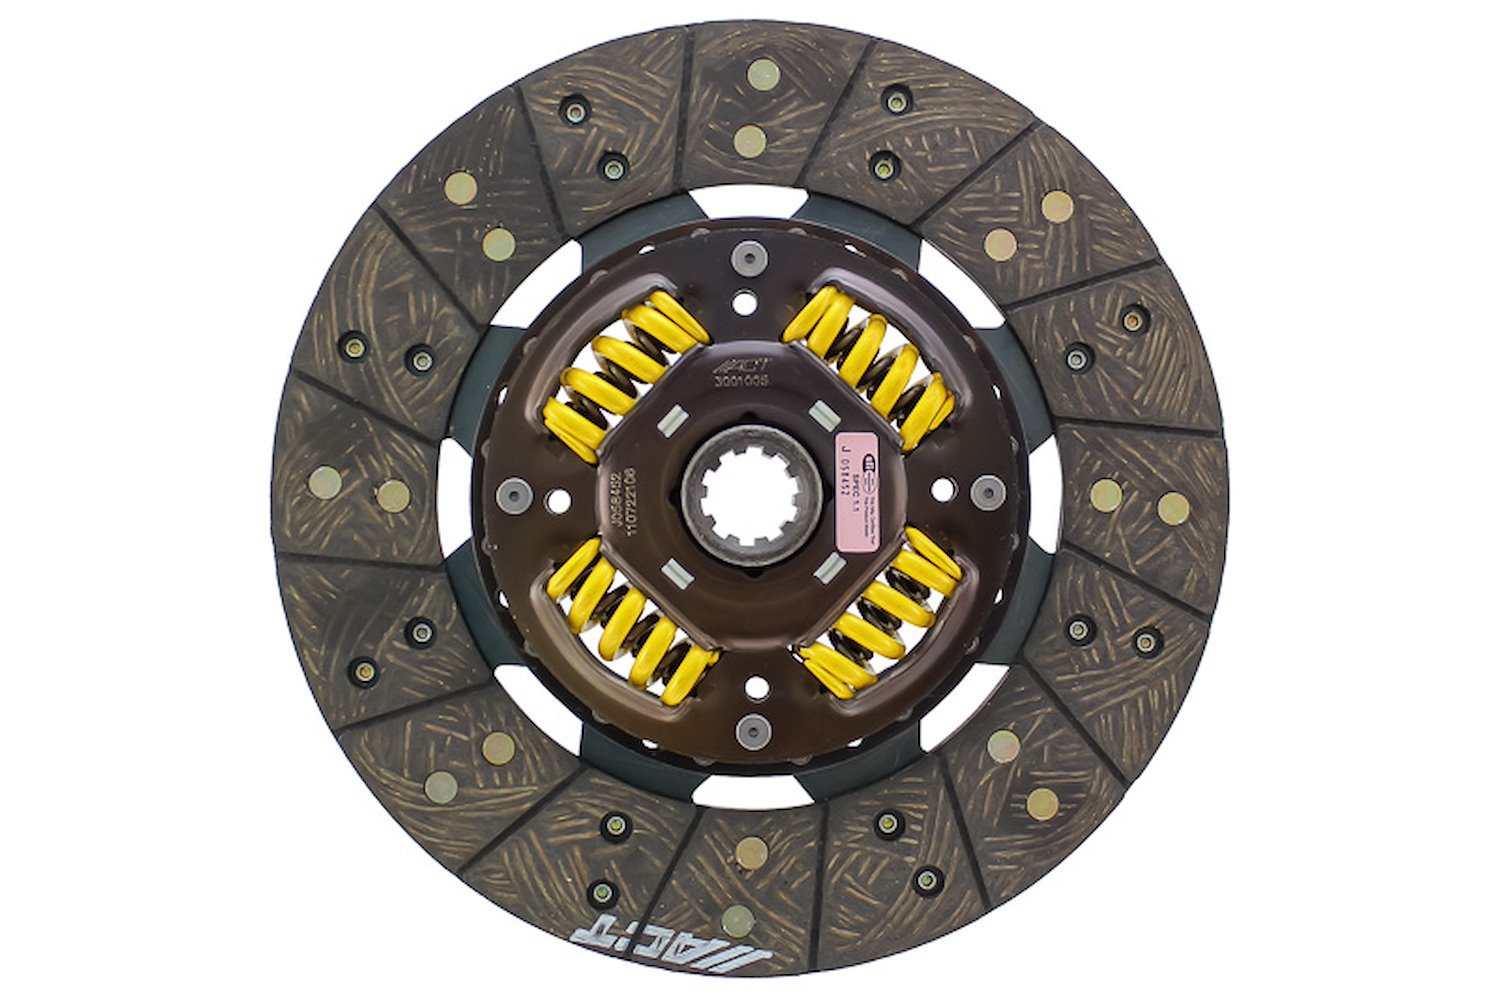 Performance Street Sprung Disc Transmission Clutch Friction Plate Fits Select Ford/Mazda/Mercury